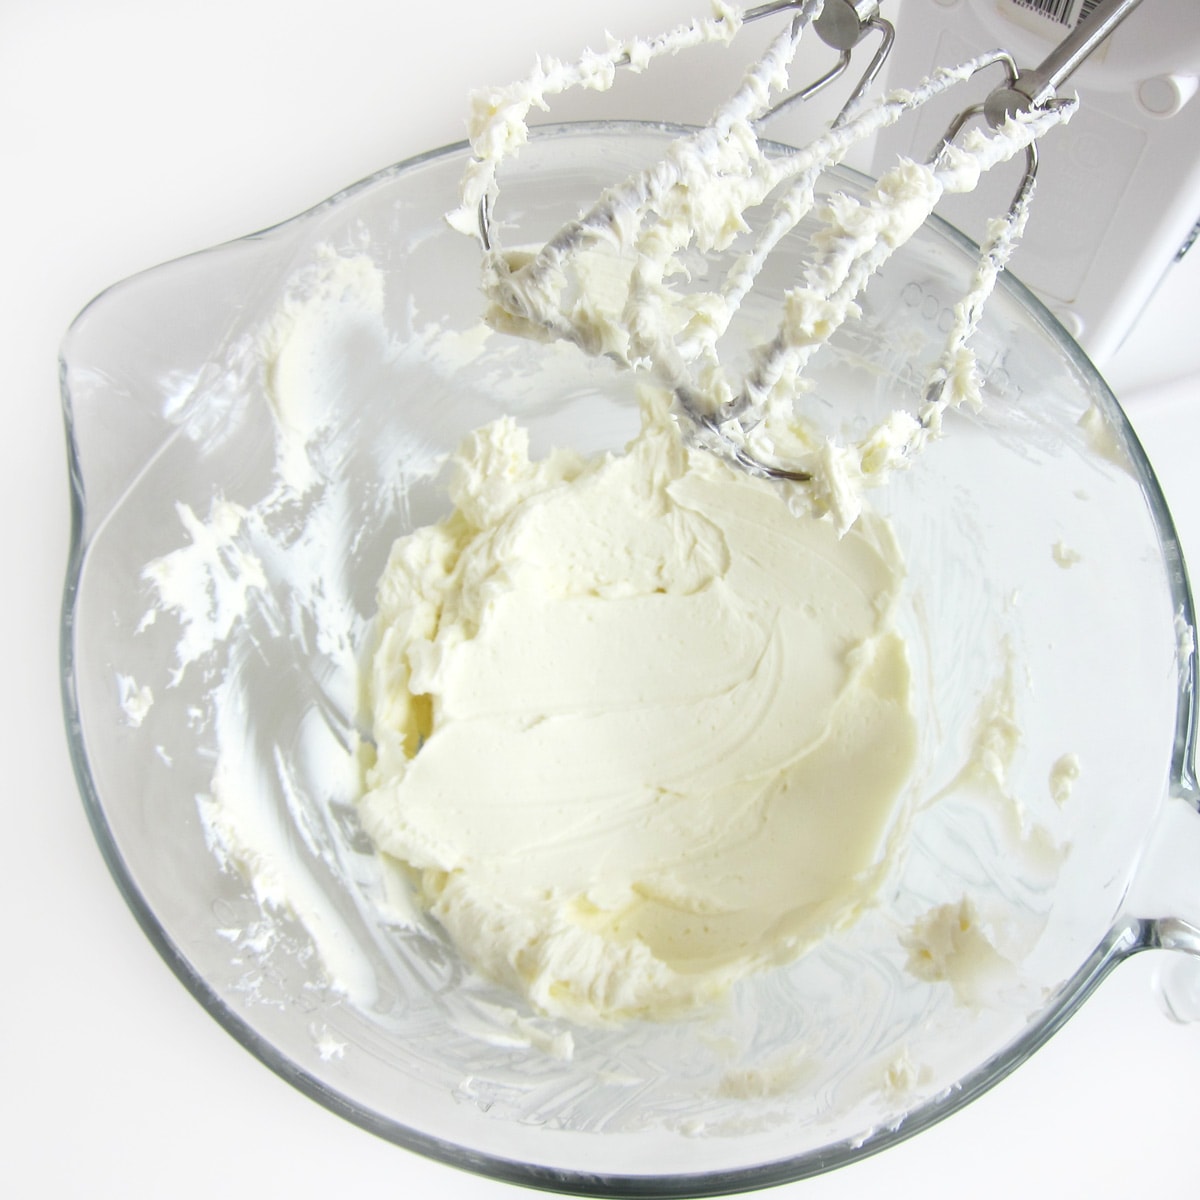 Cream cheese in a mixing bowl is creamed using a hand-held mixer.